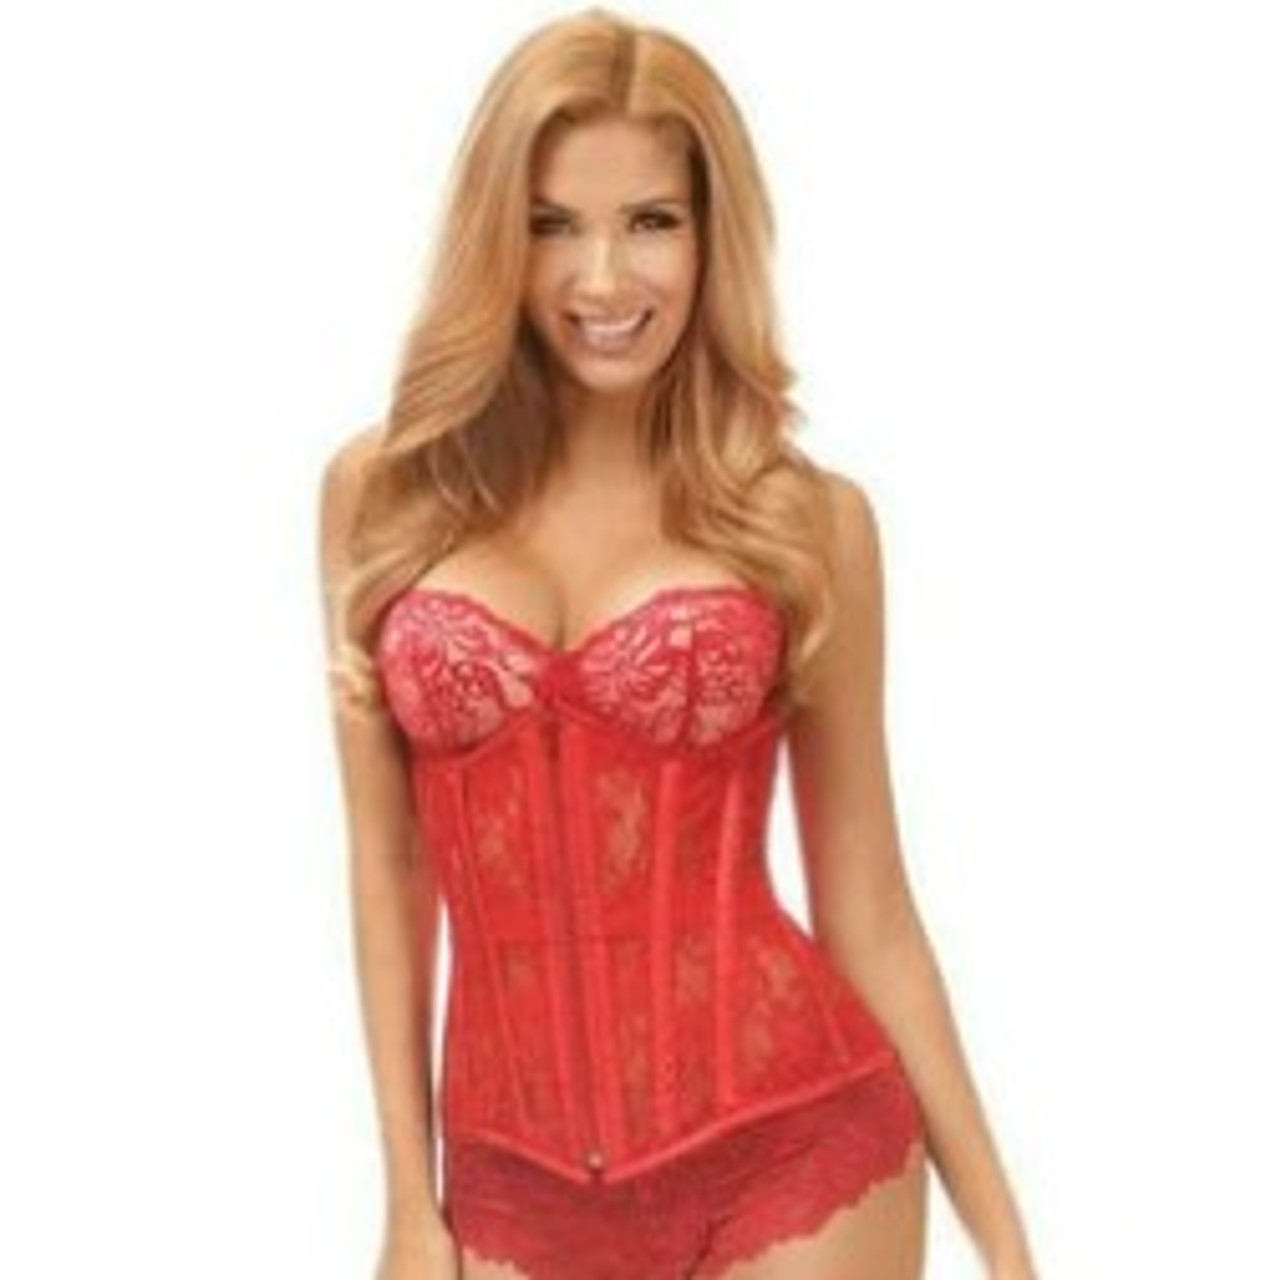 Lavish Wet Look Under Bust Corset Red w/Lace Overlay